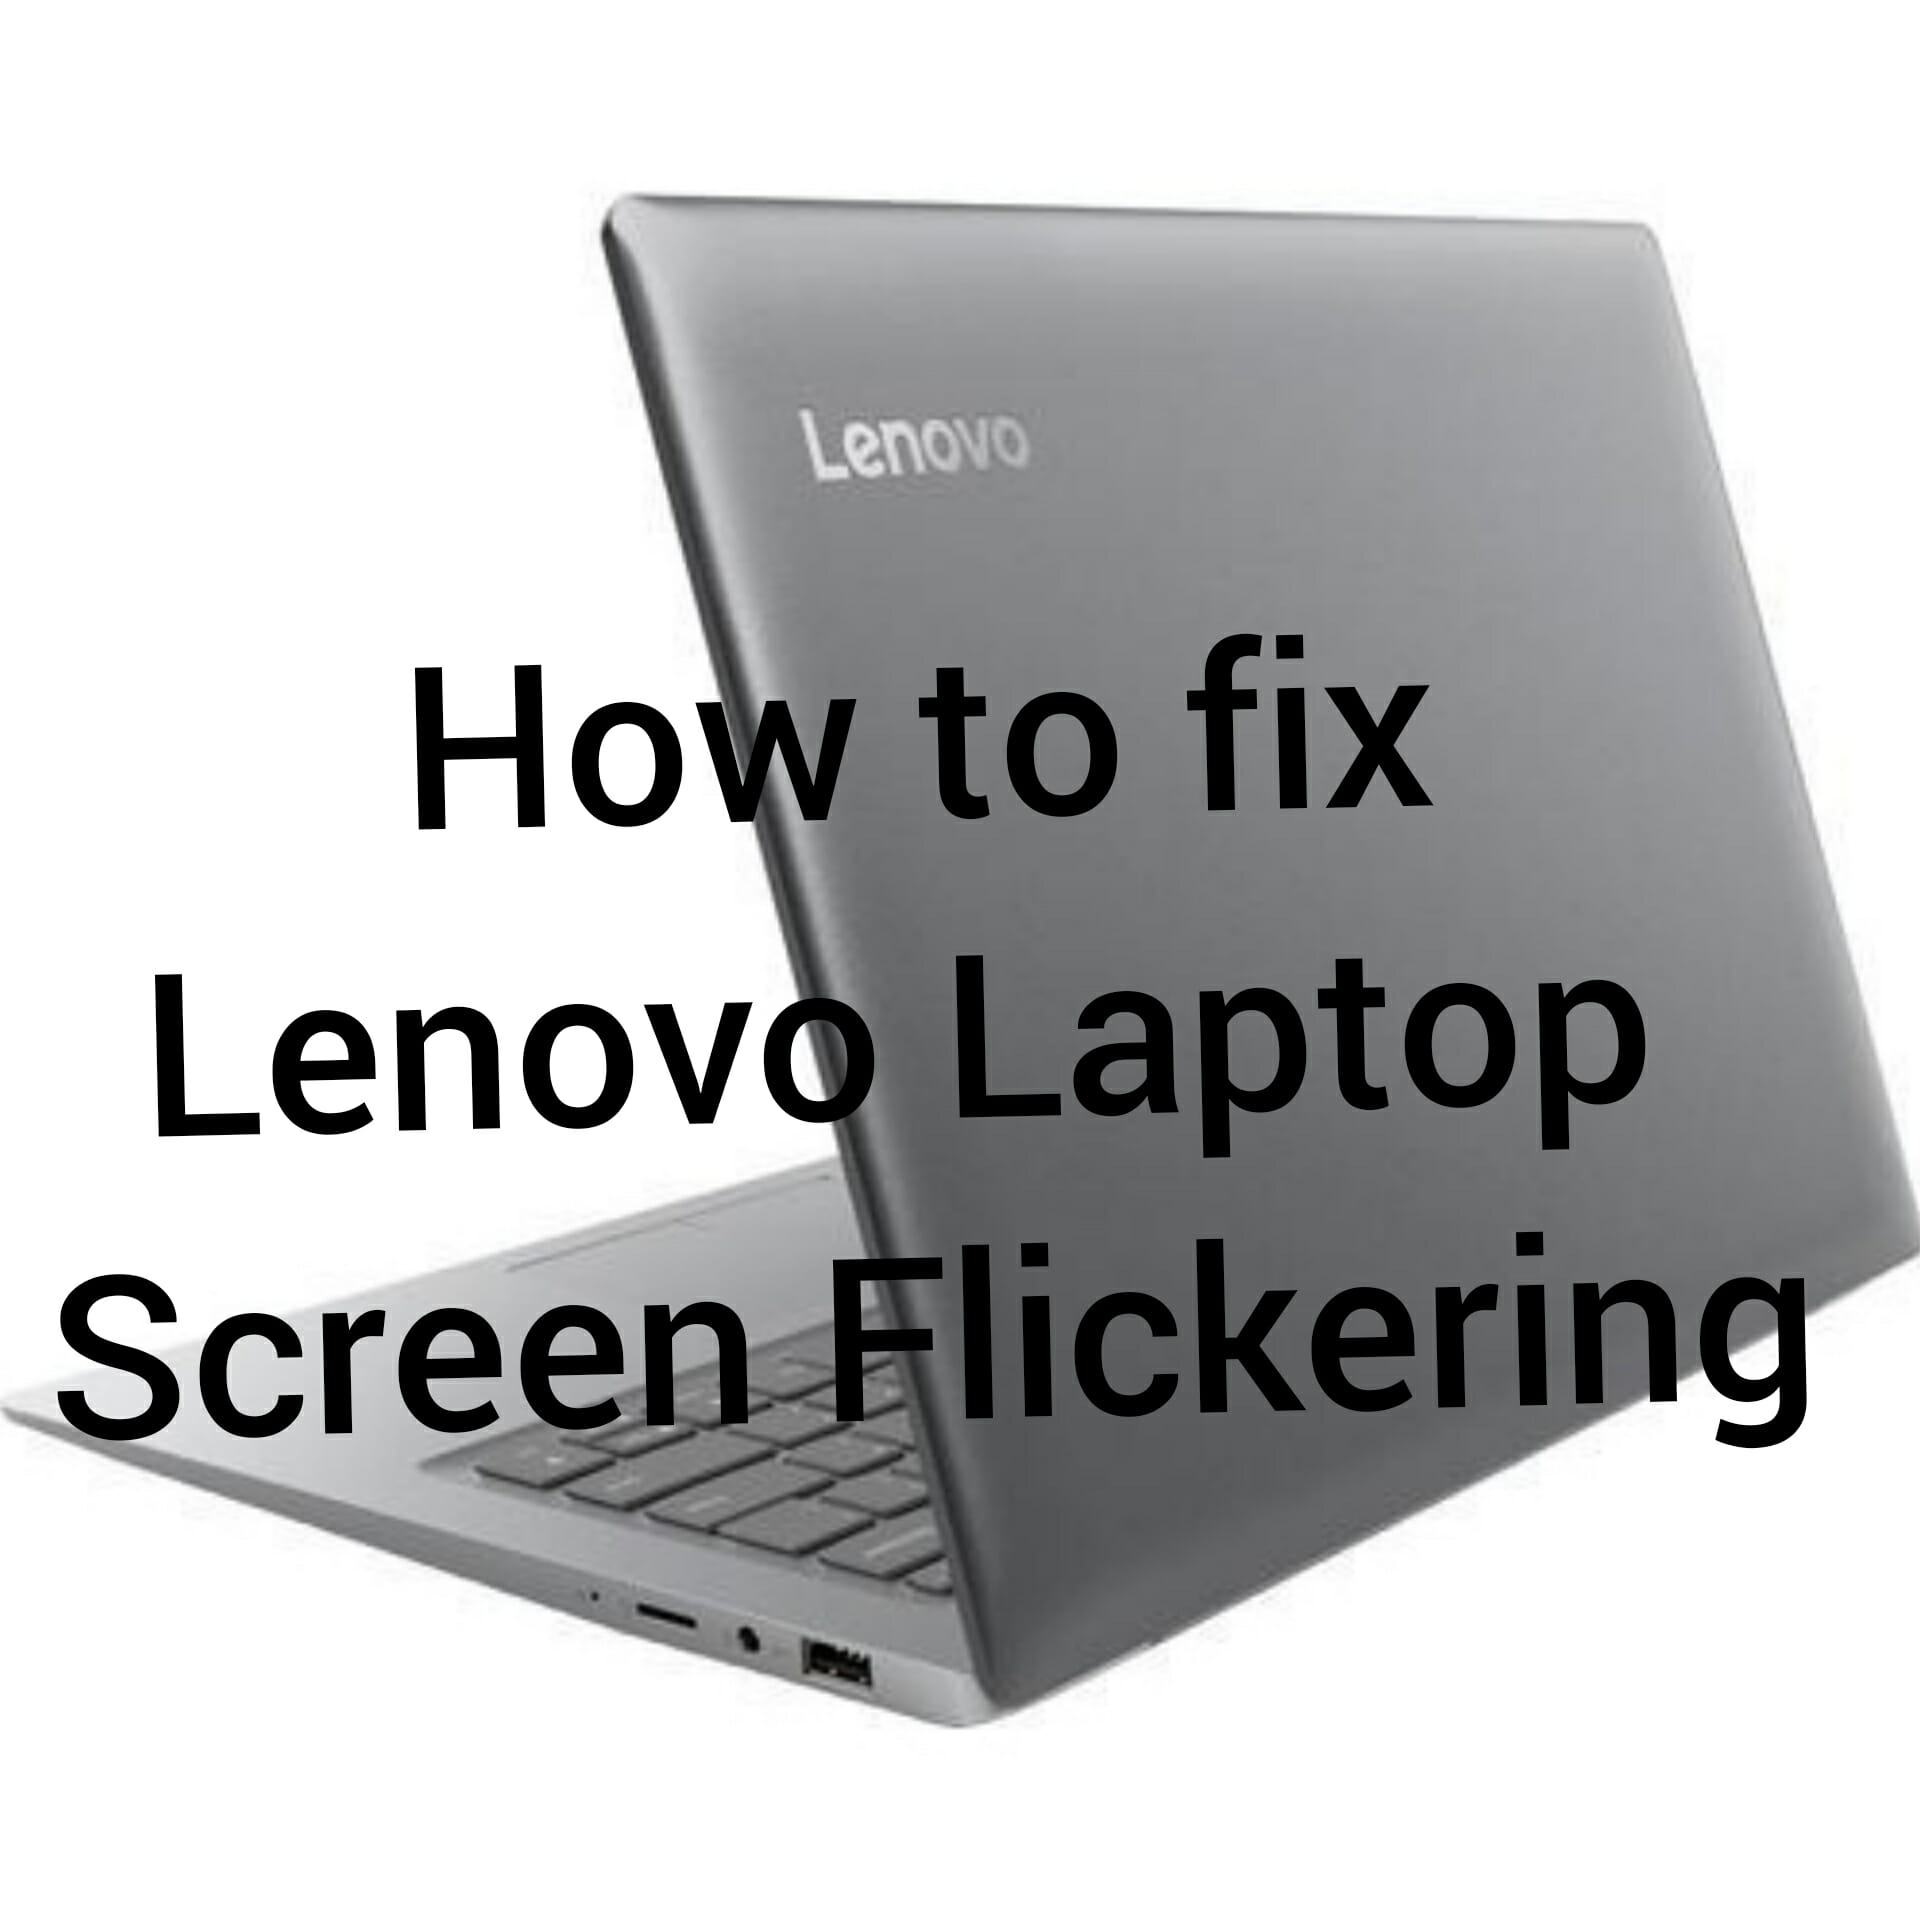 Fix Lenovo Laptop Screen Flickering Issue - Simple Steps to Fix